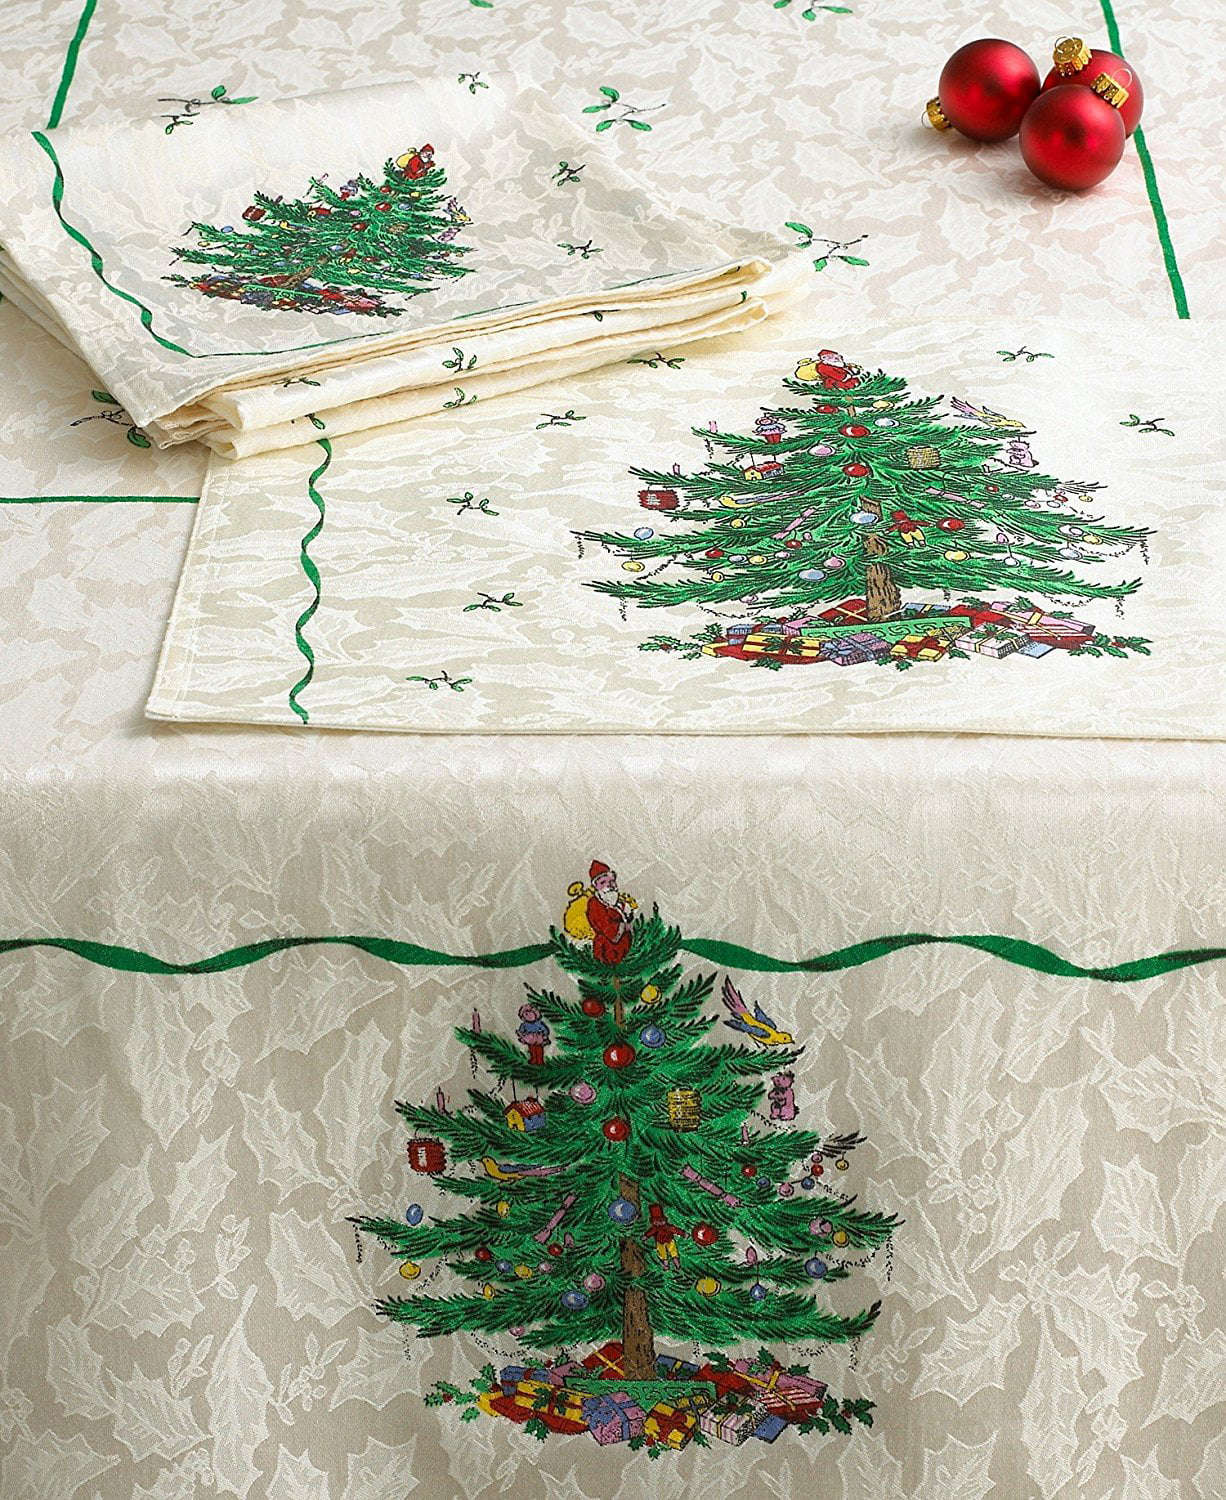 Spode Iconic Christmas Tree set of 4 Cloth Place Mats total sets available 3 